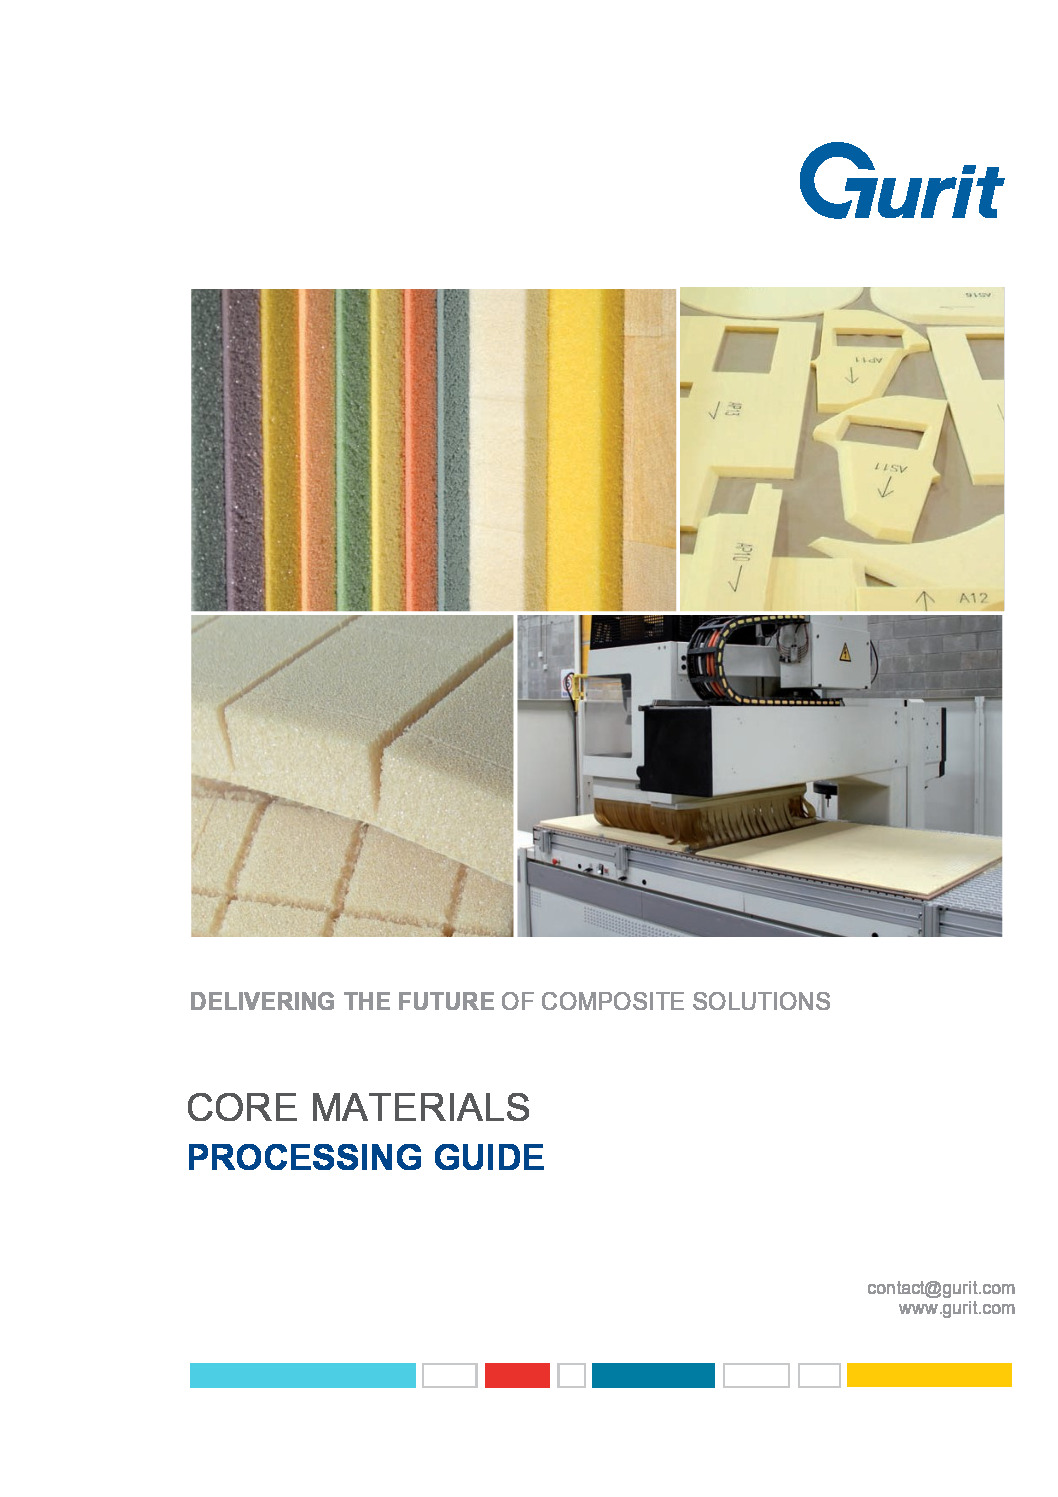 Gurit Core Materials Processing Guide